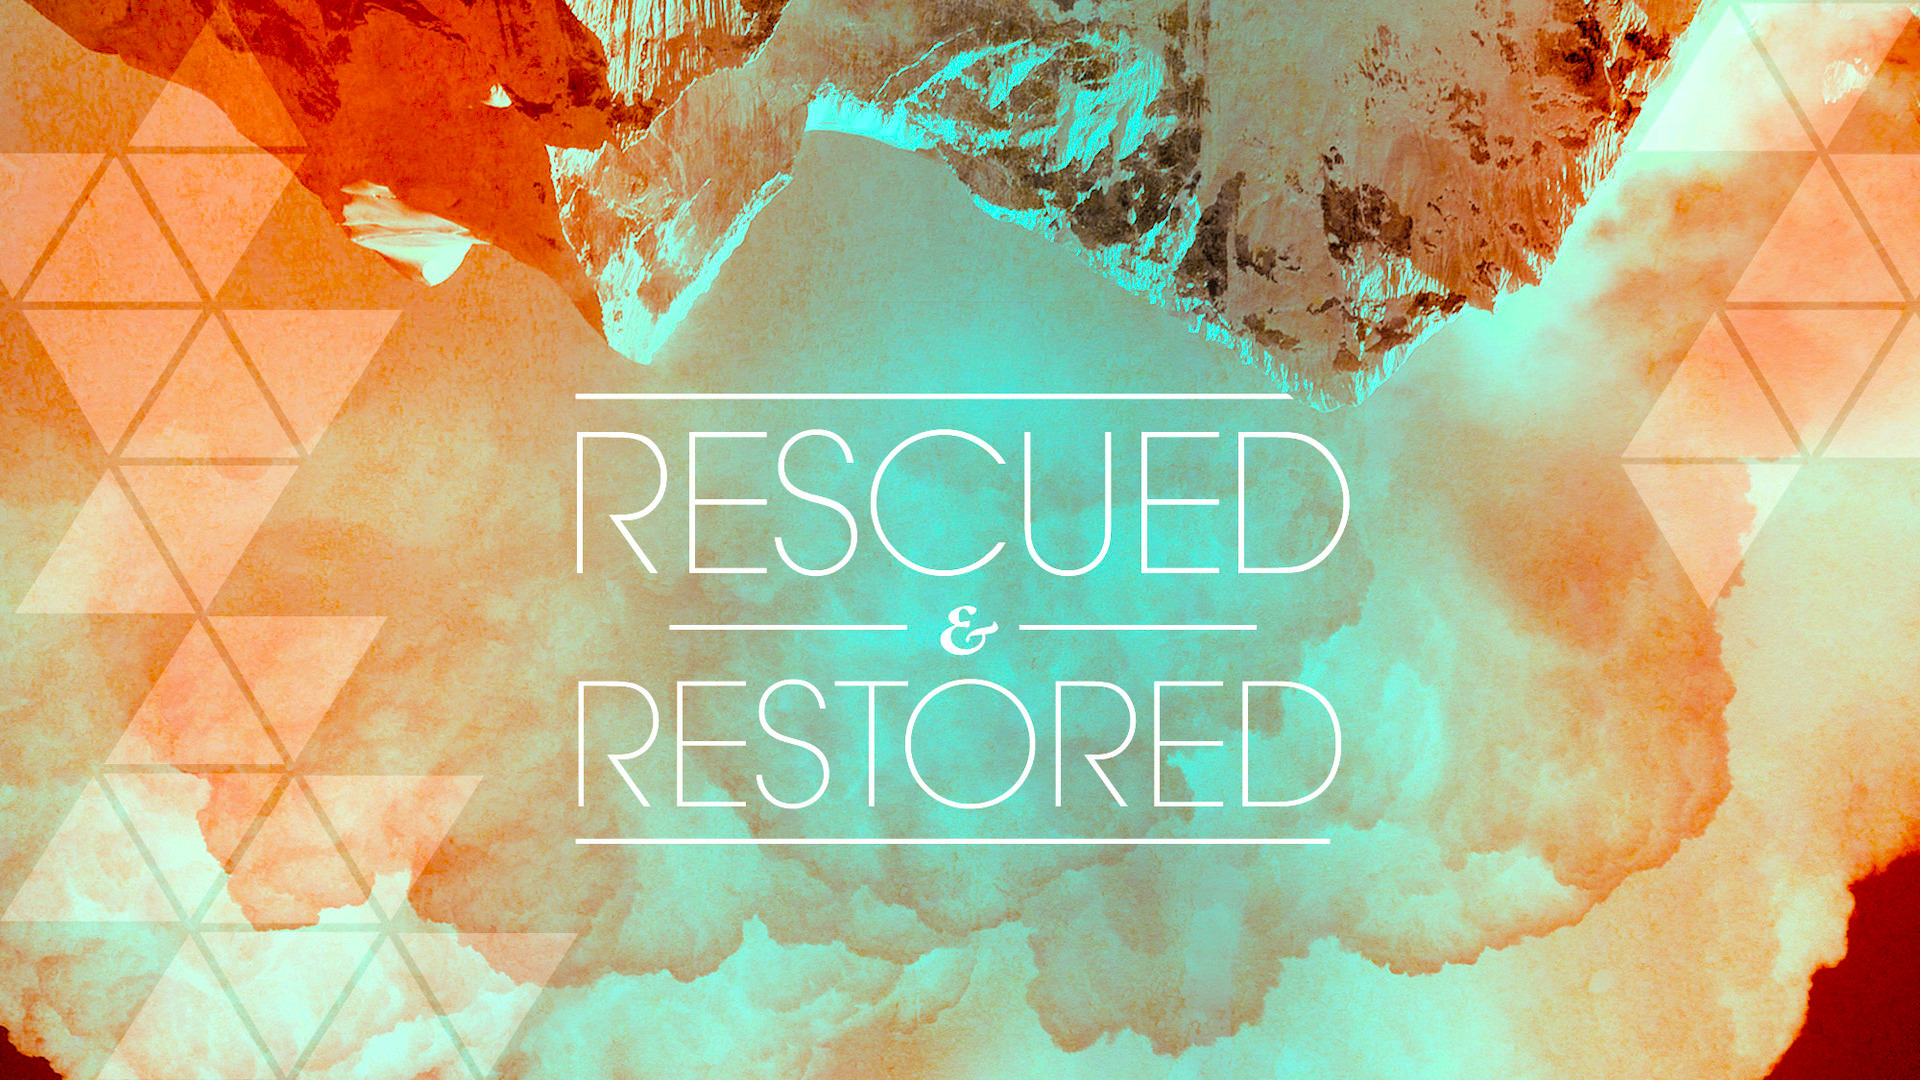 08-14-16 | Rescued & Restored | What Really Matters